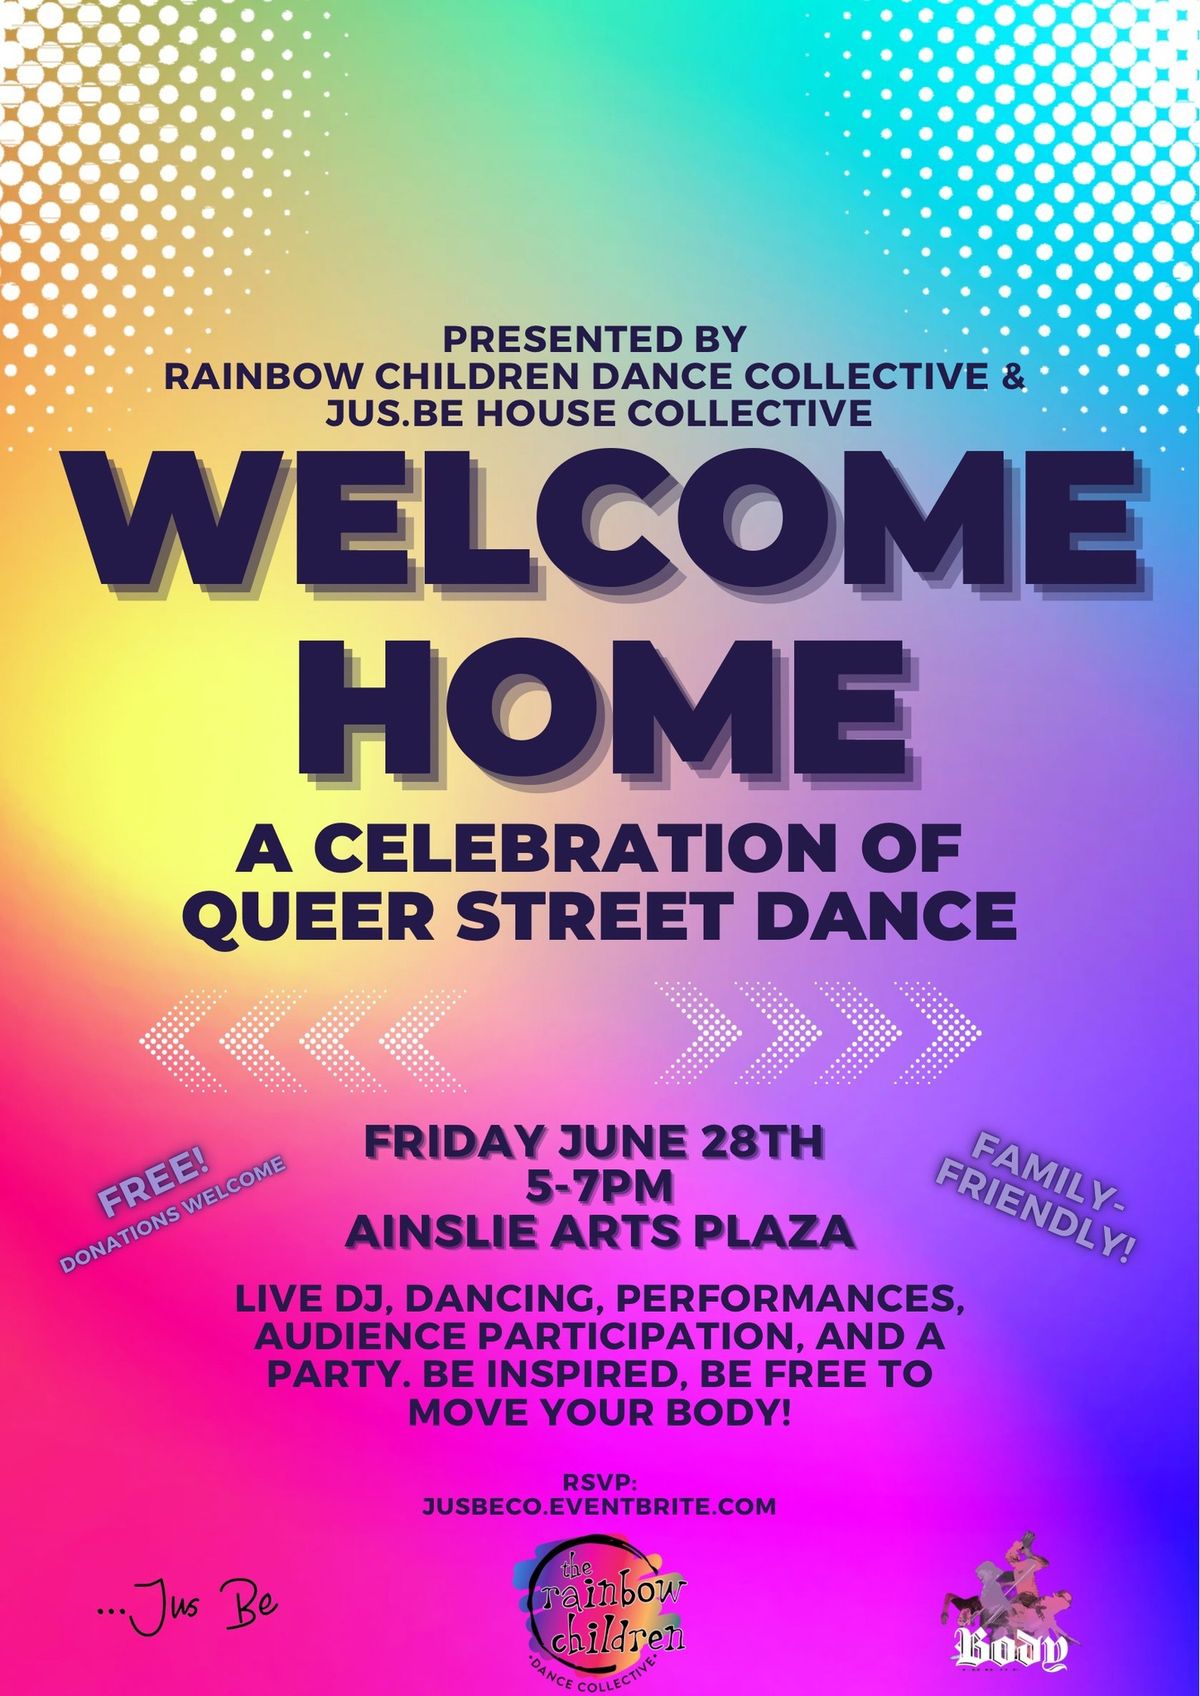 WELCOME HOME: A Celebration of Queer Street Dance